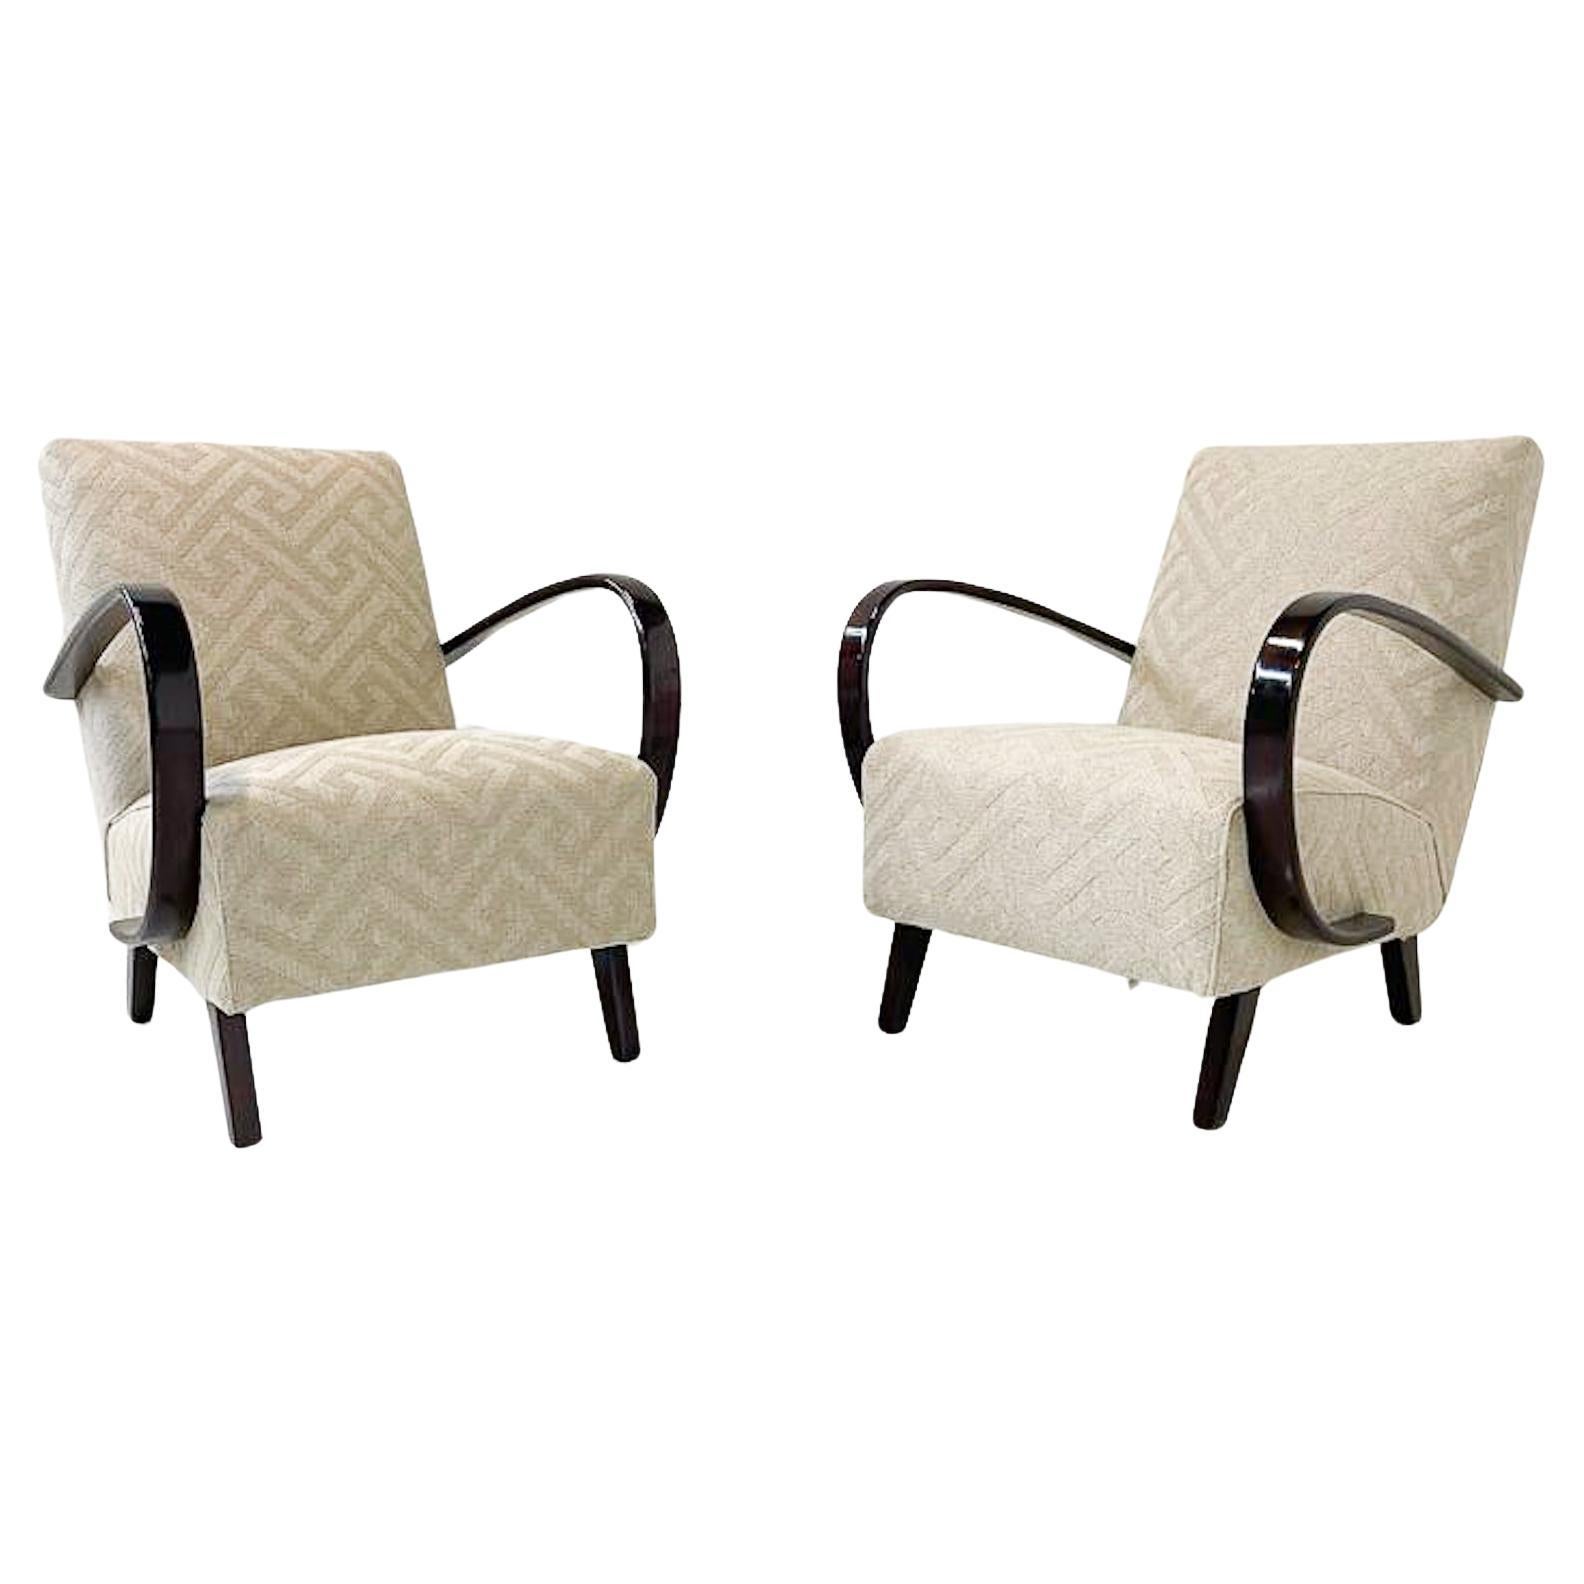 Pair of Bentwood Armchairs by Jindrich Halabala - Czech Republic 1940s For Sale